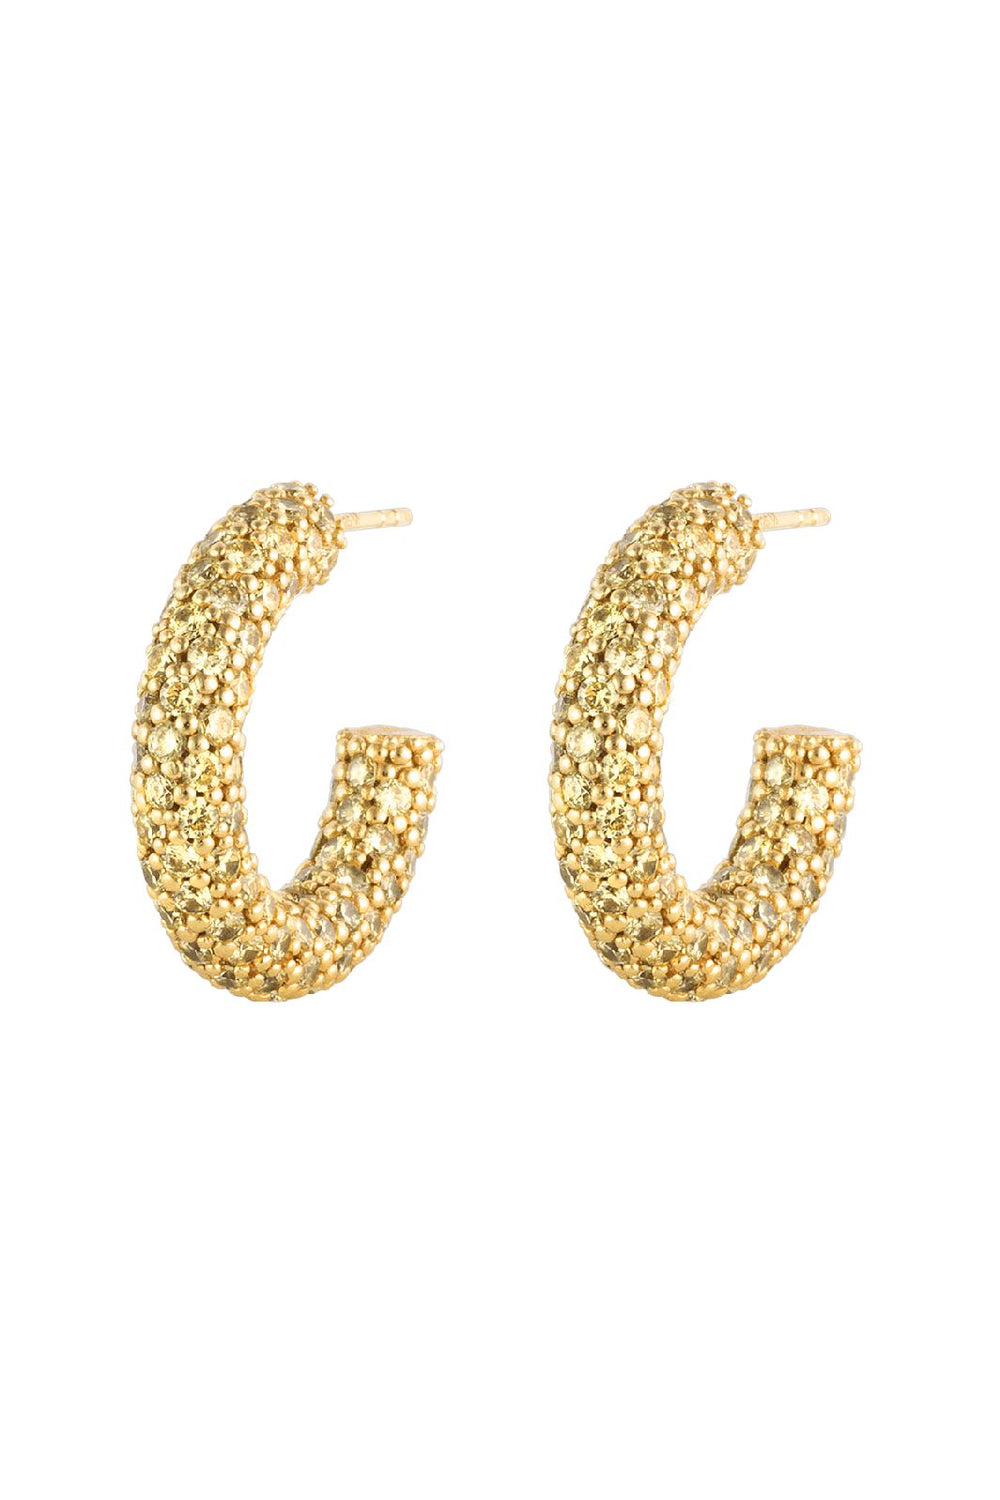 House Of Vincent - Halo Heritage Hoop Earrings - Gilded